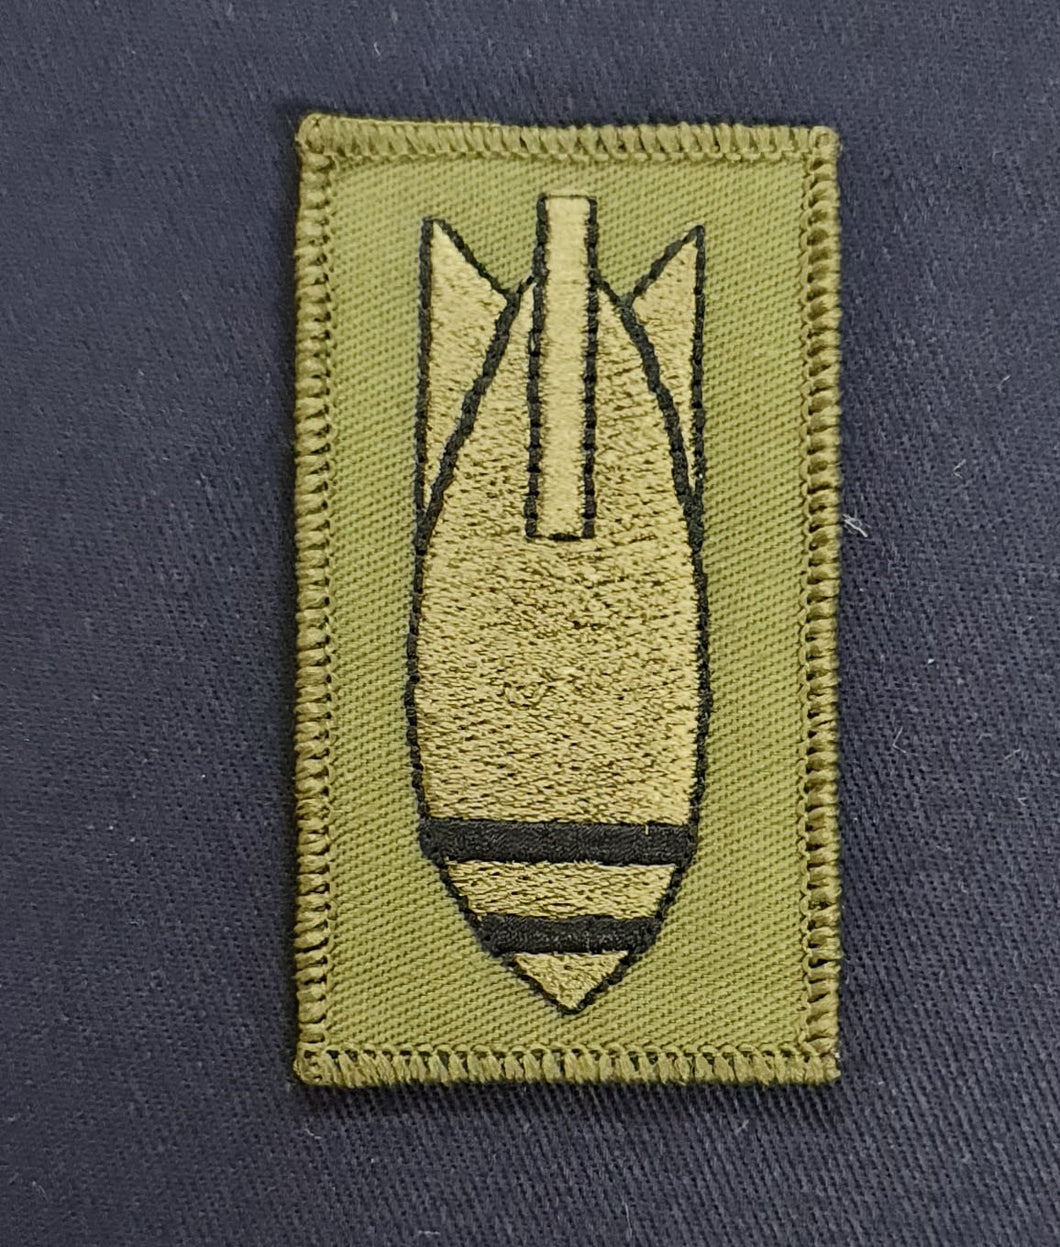 Royal Navy PCS Subdued Olive Green EOD Bomb Disposal Qualification Badge